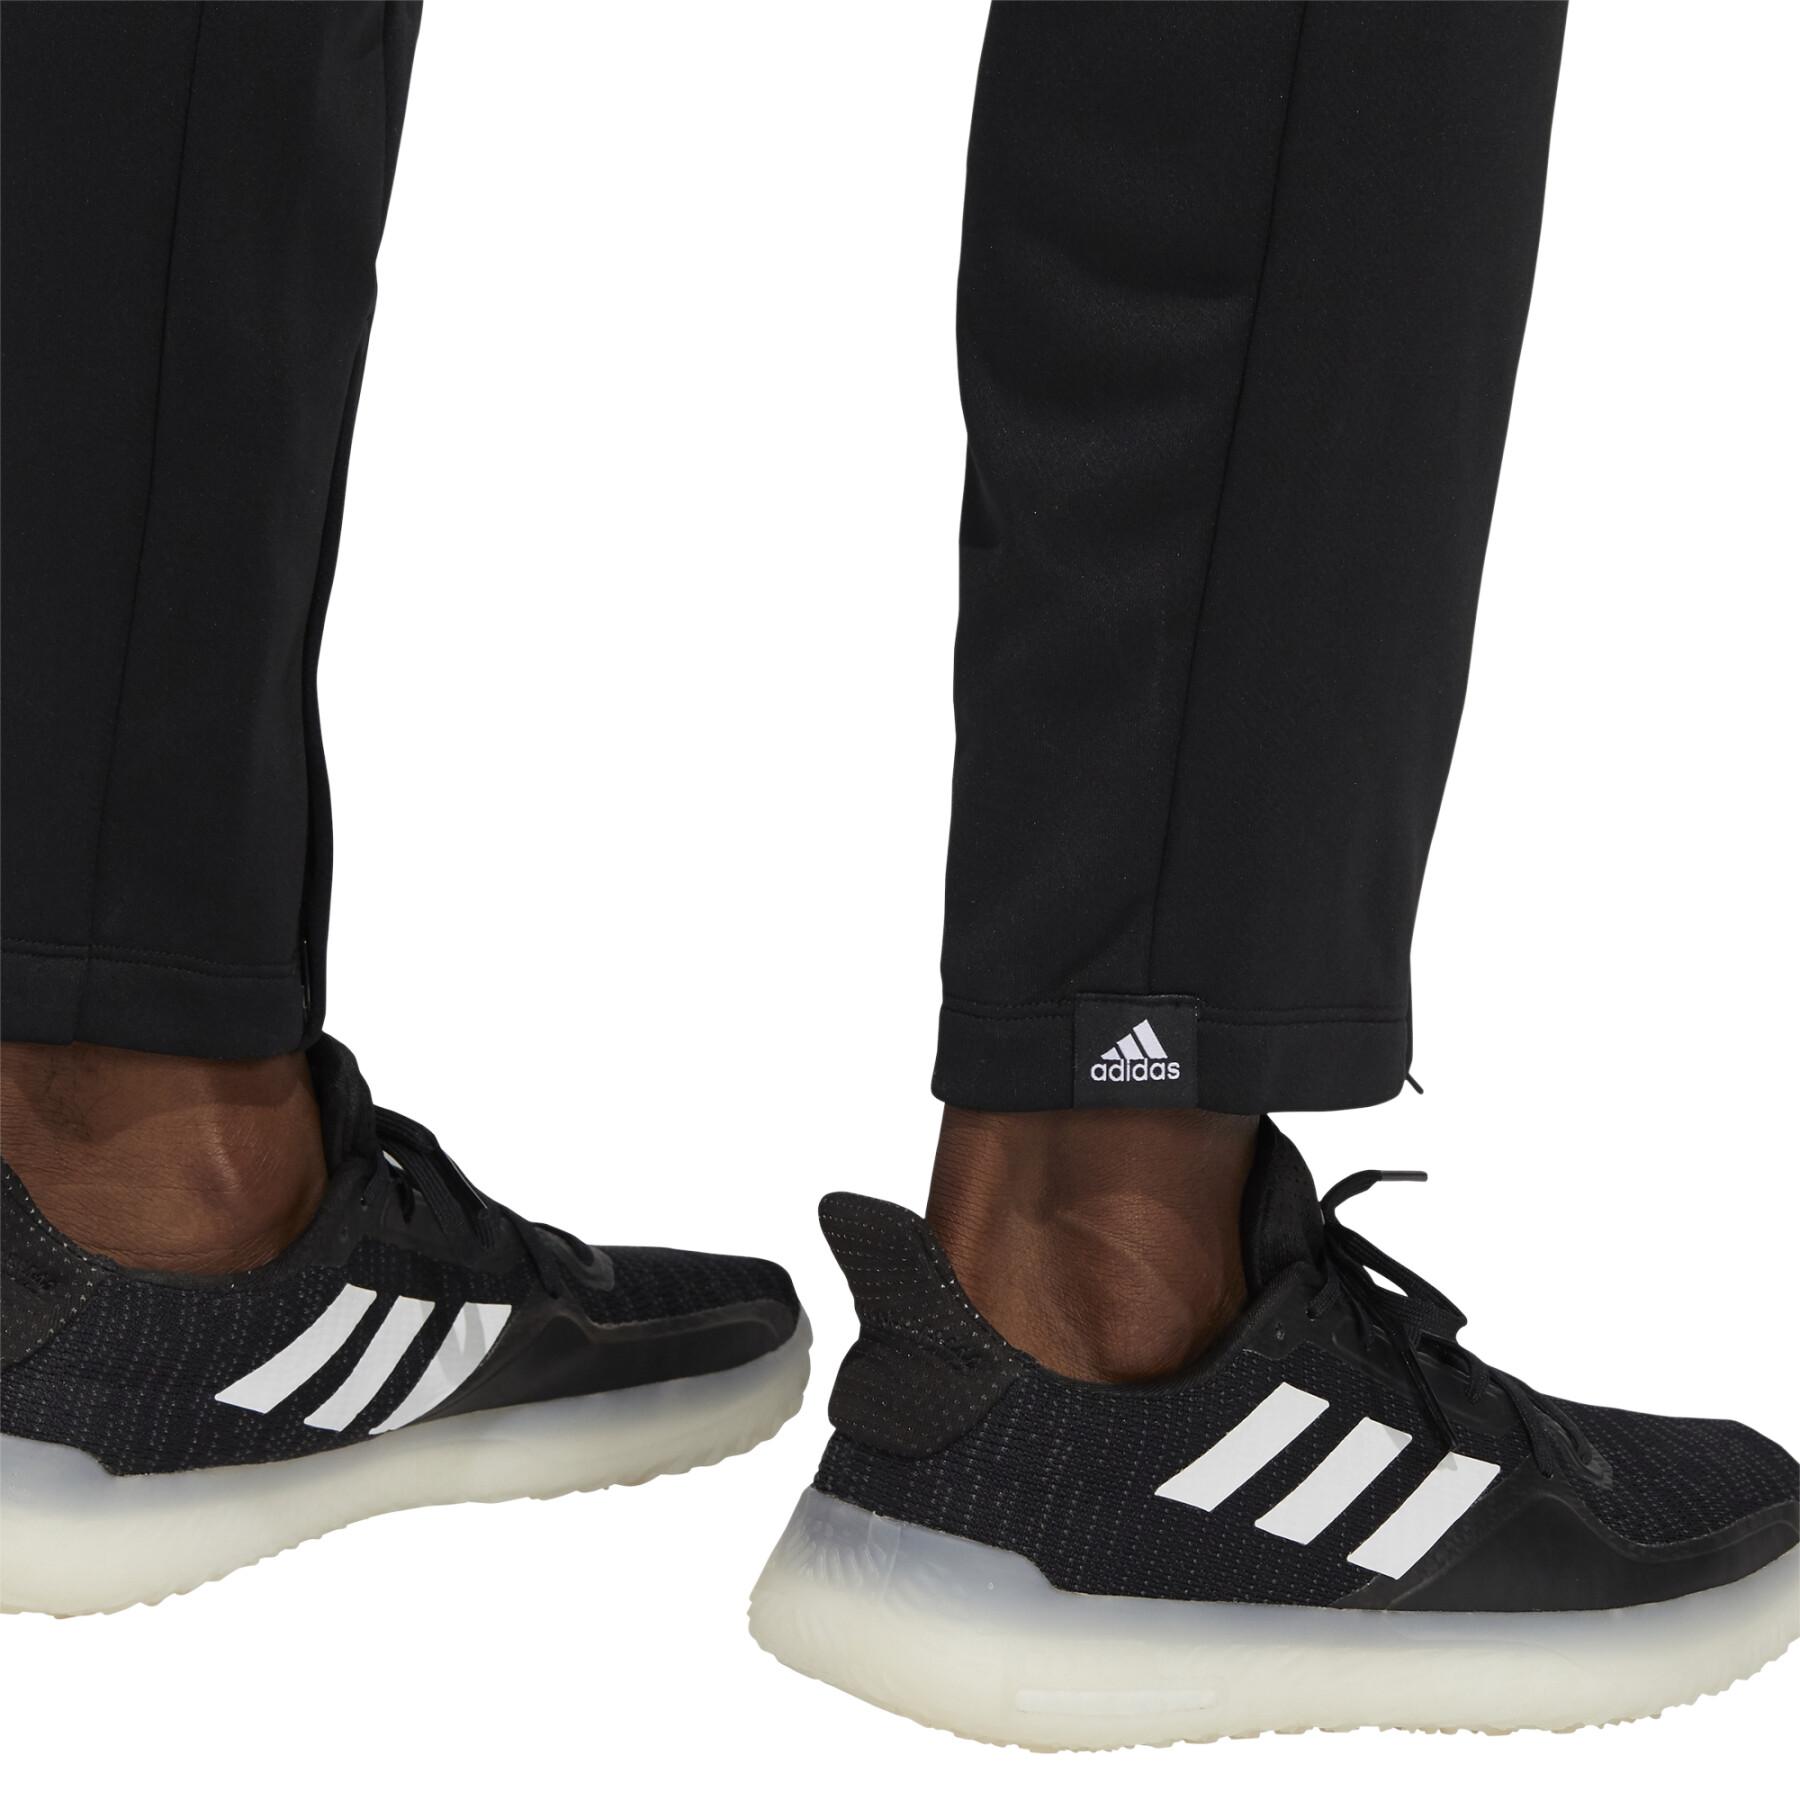 Hosen adidas Game And Go Tappered